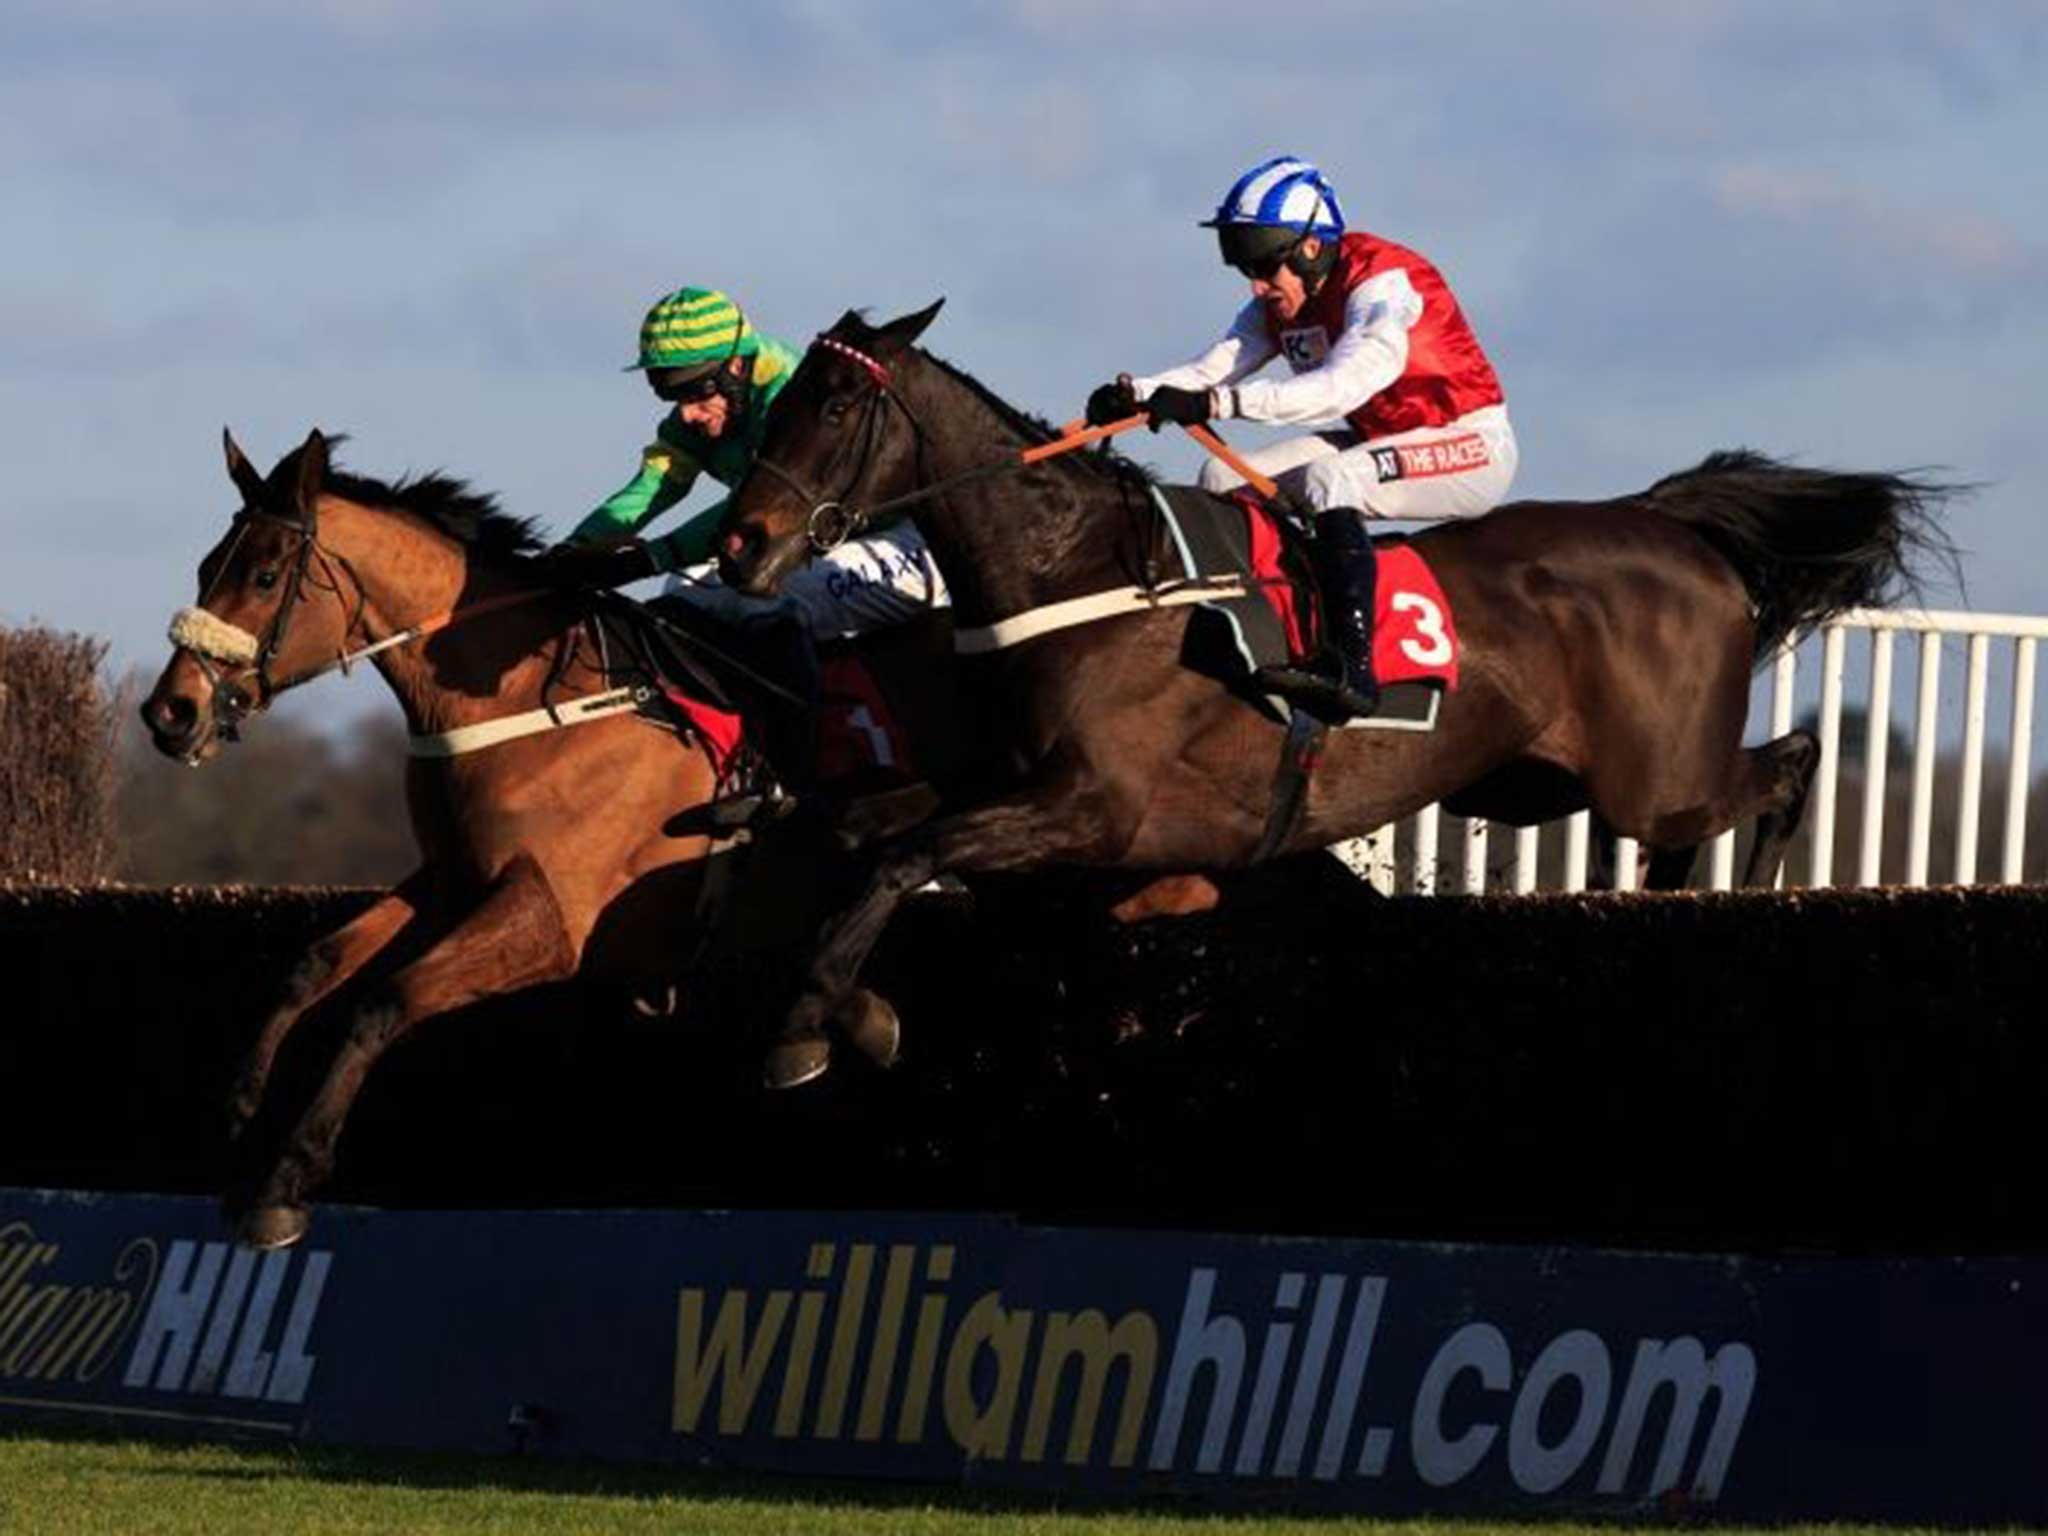 Third Intention (left), ridden by Daryl Jacob, holds the edge over the odds-on Josses Hill at the last in Kempton’s Graduation Chase yesterday